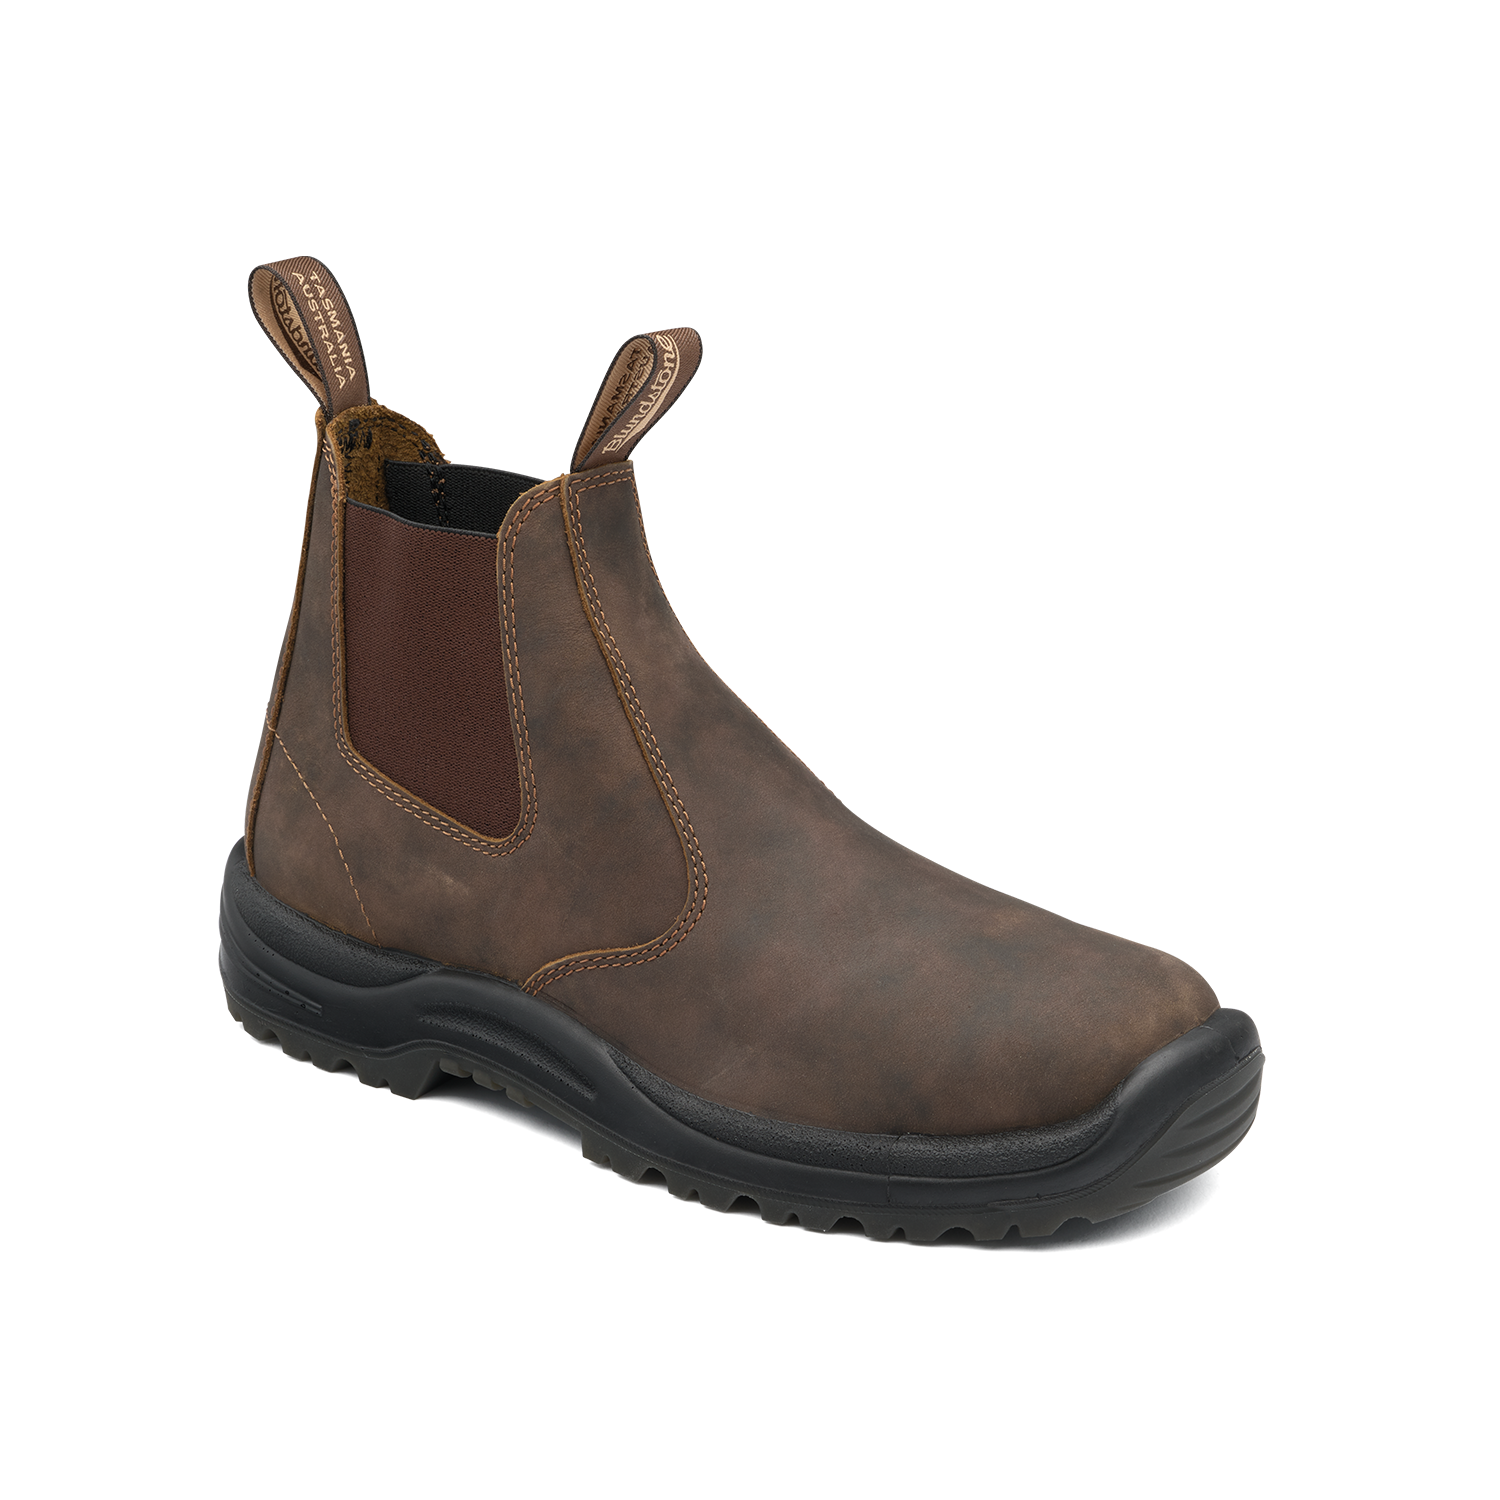 Blundstone 492 Non-Safety Work Boot Rustic Brown